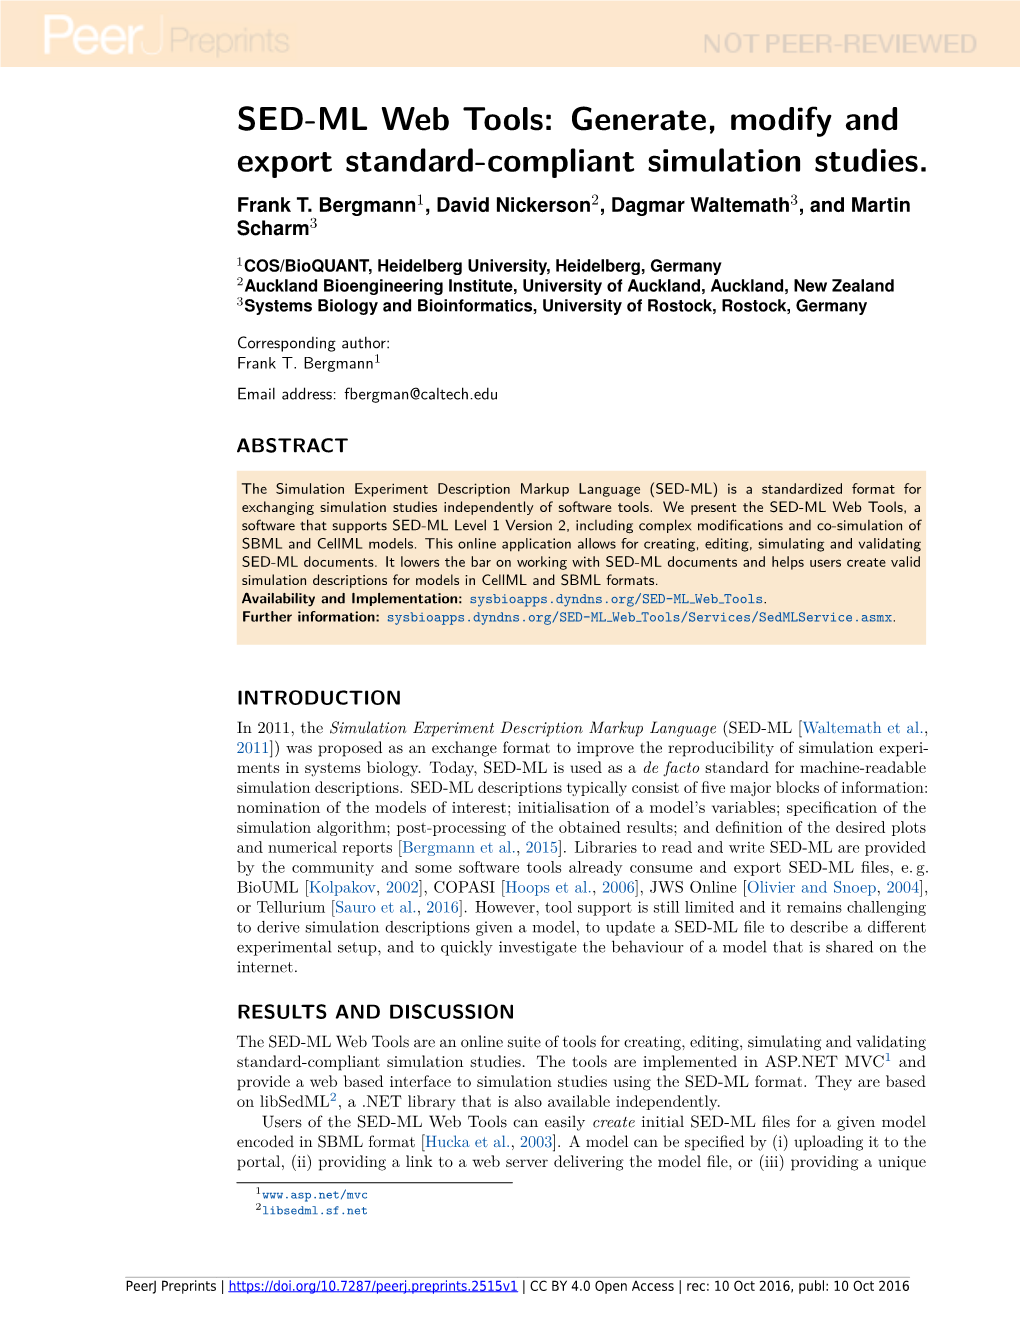 SED-ML Web Tools: Generate, Modify and Export Standard-Compliant Simulation Studies